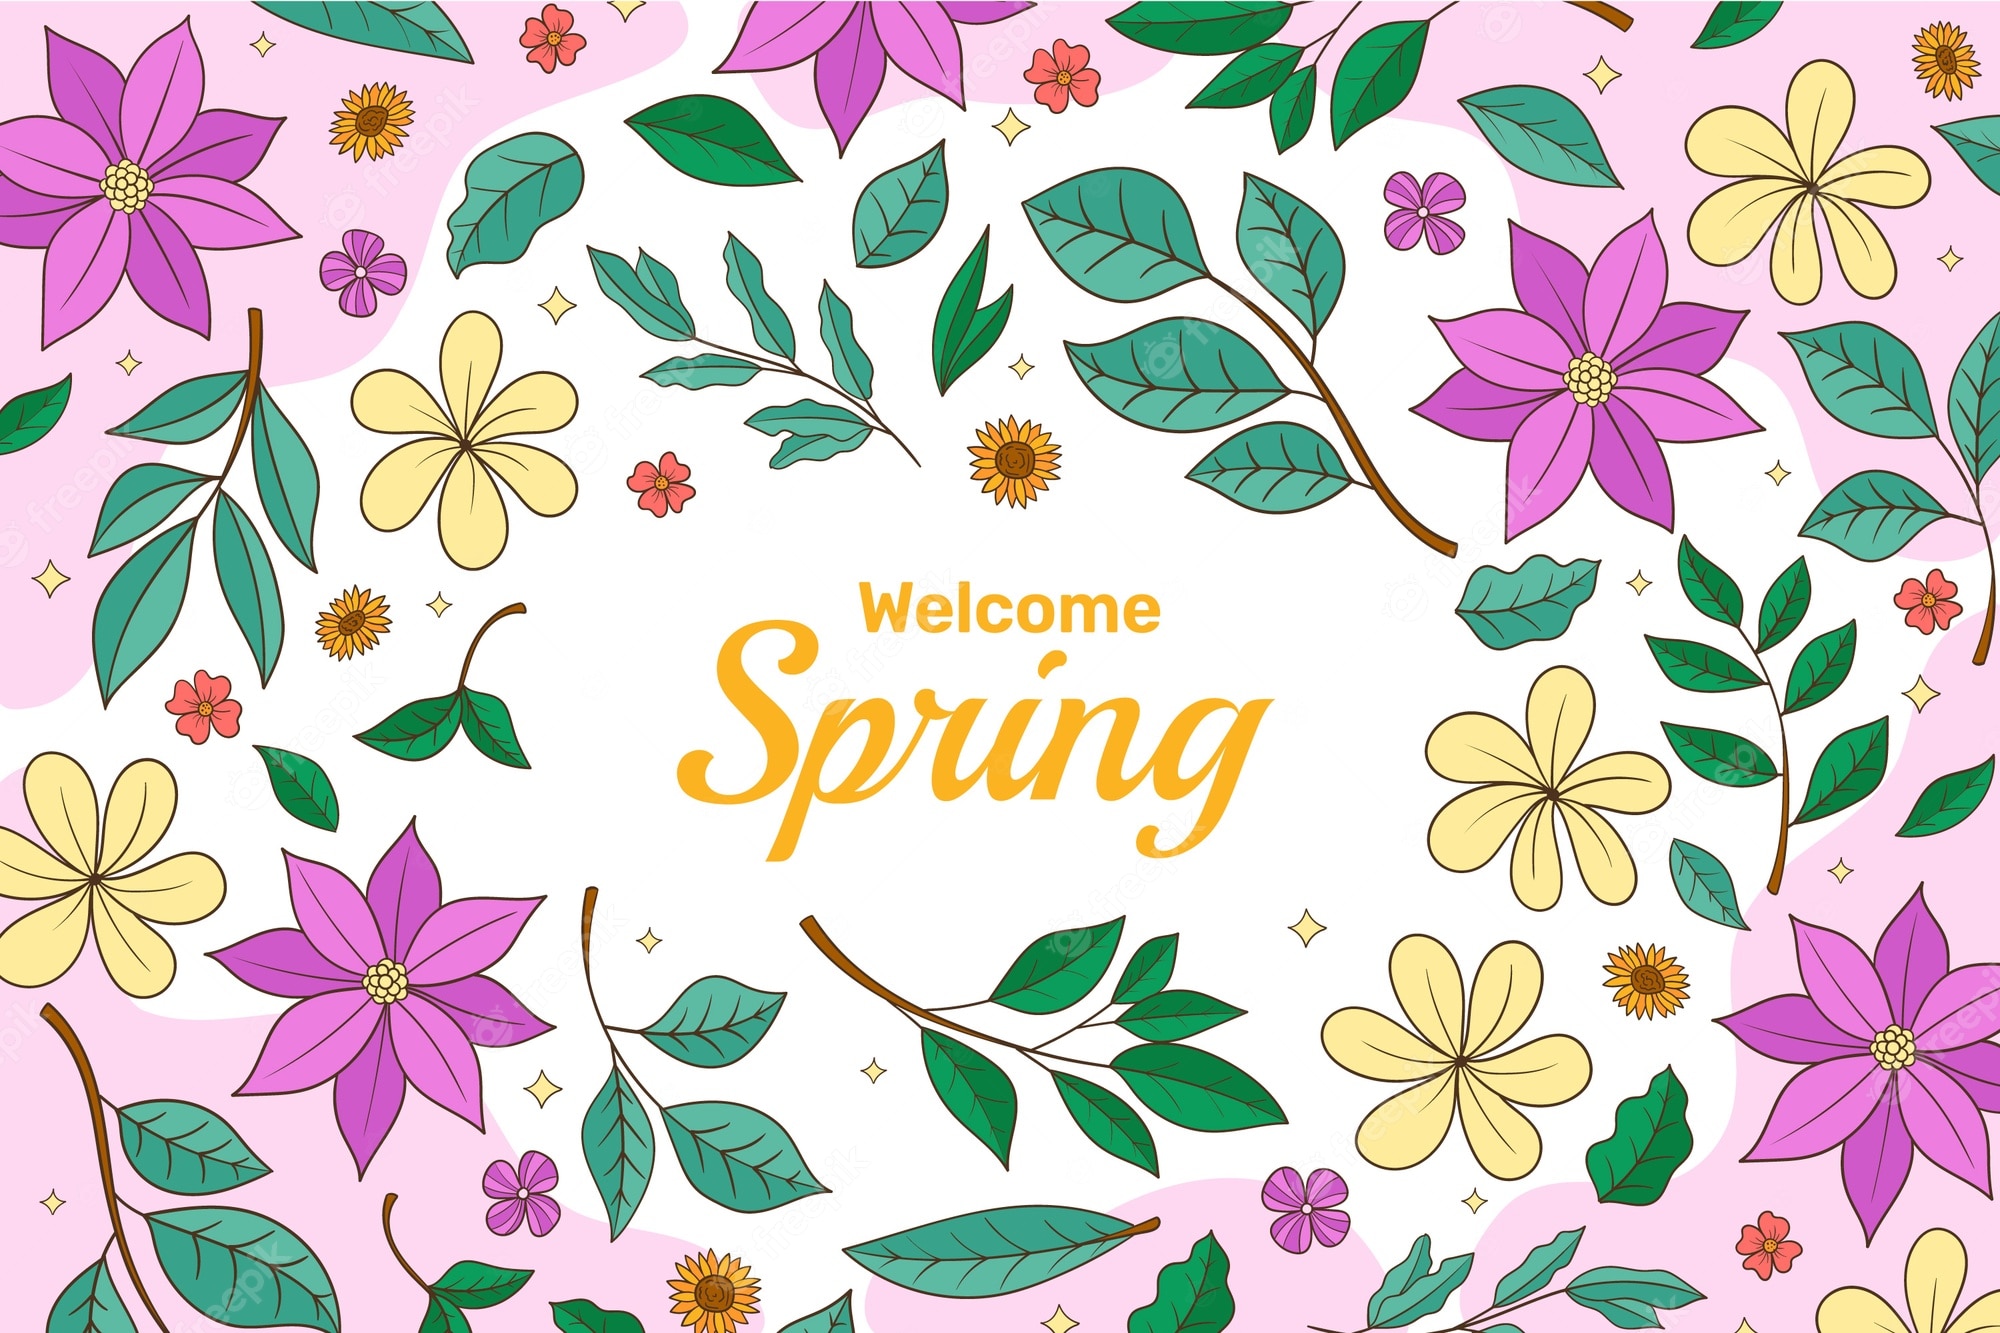 Free Vector. Flat background for spring season